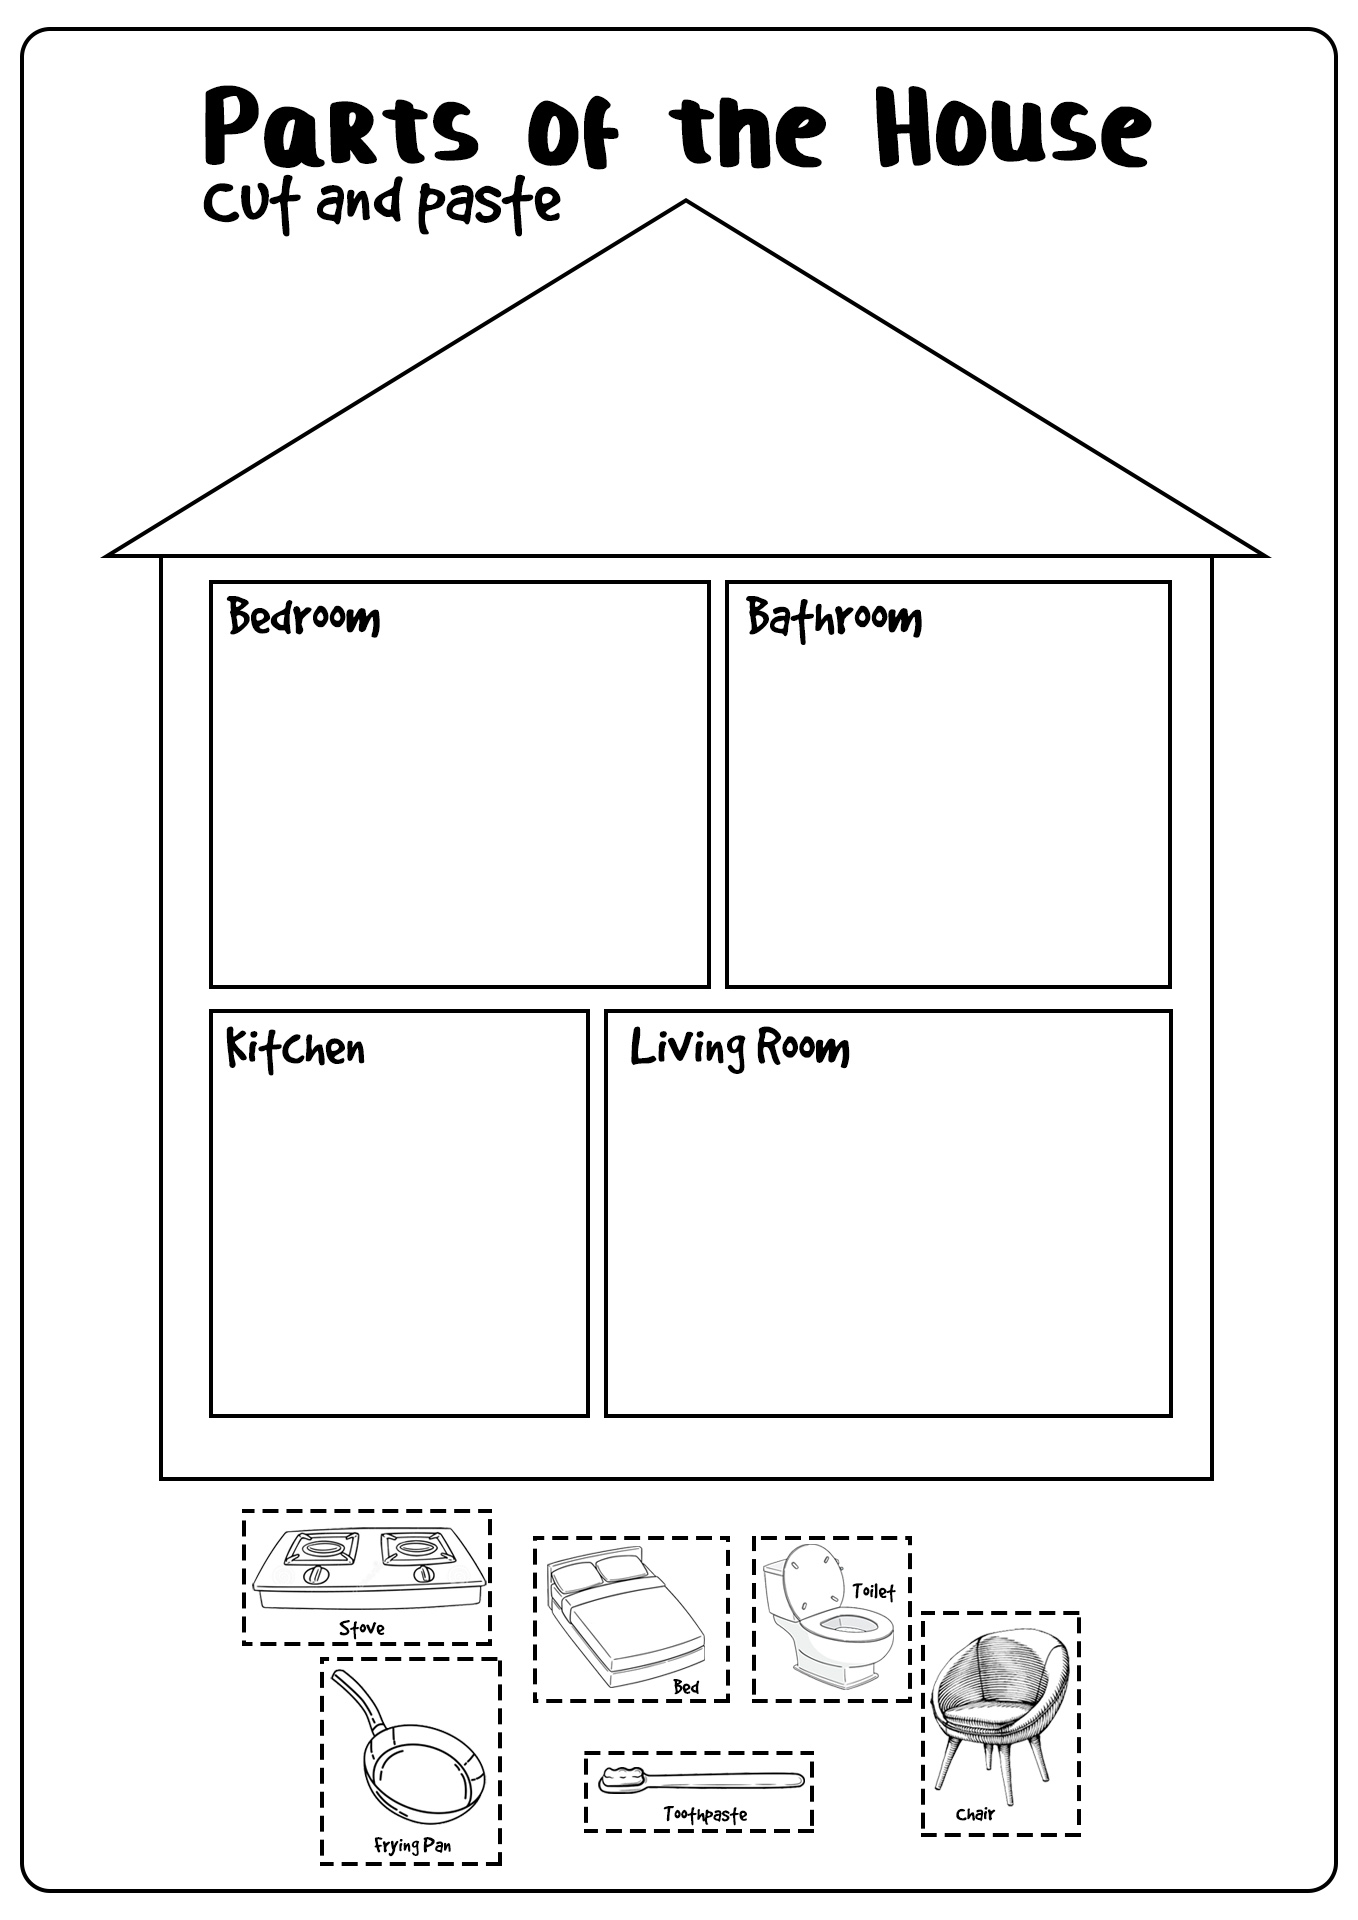 13-best-images-of-parts-of-the-house-worksheets-for-kindergarten